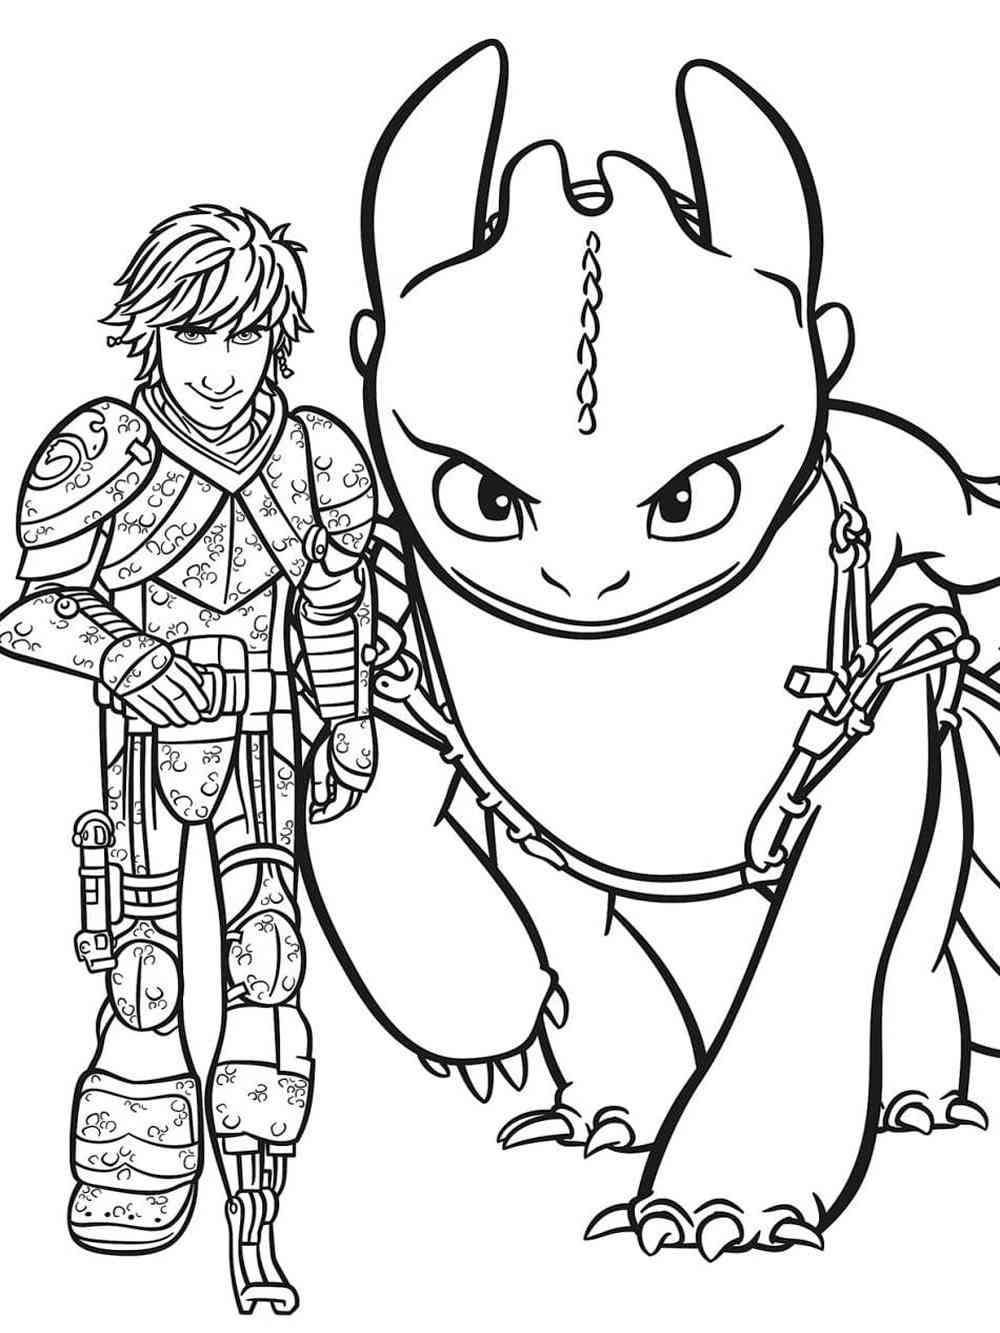 Hiccup 10 coloring page